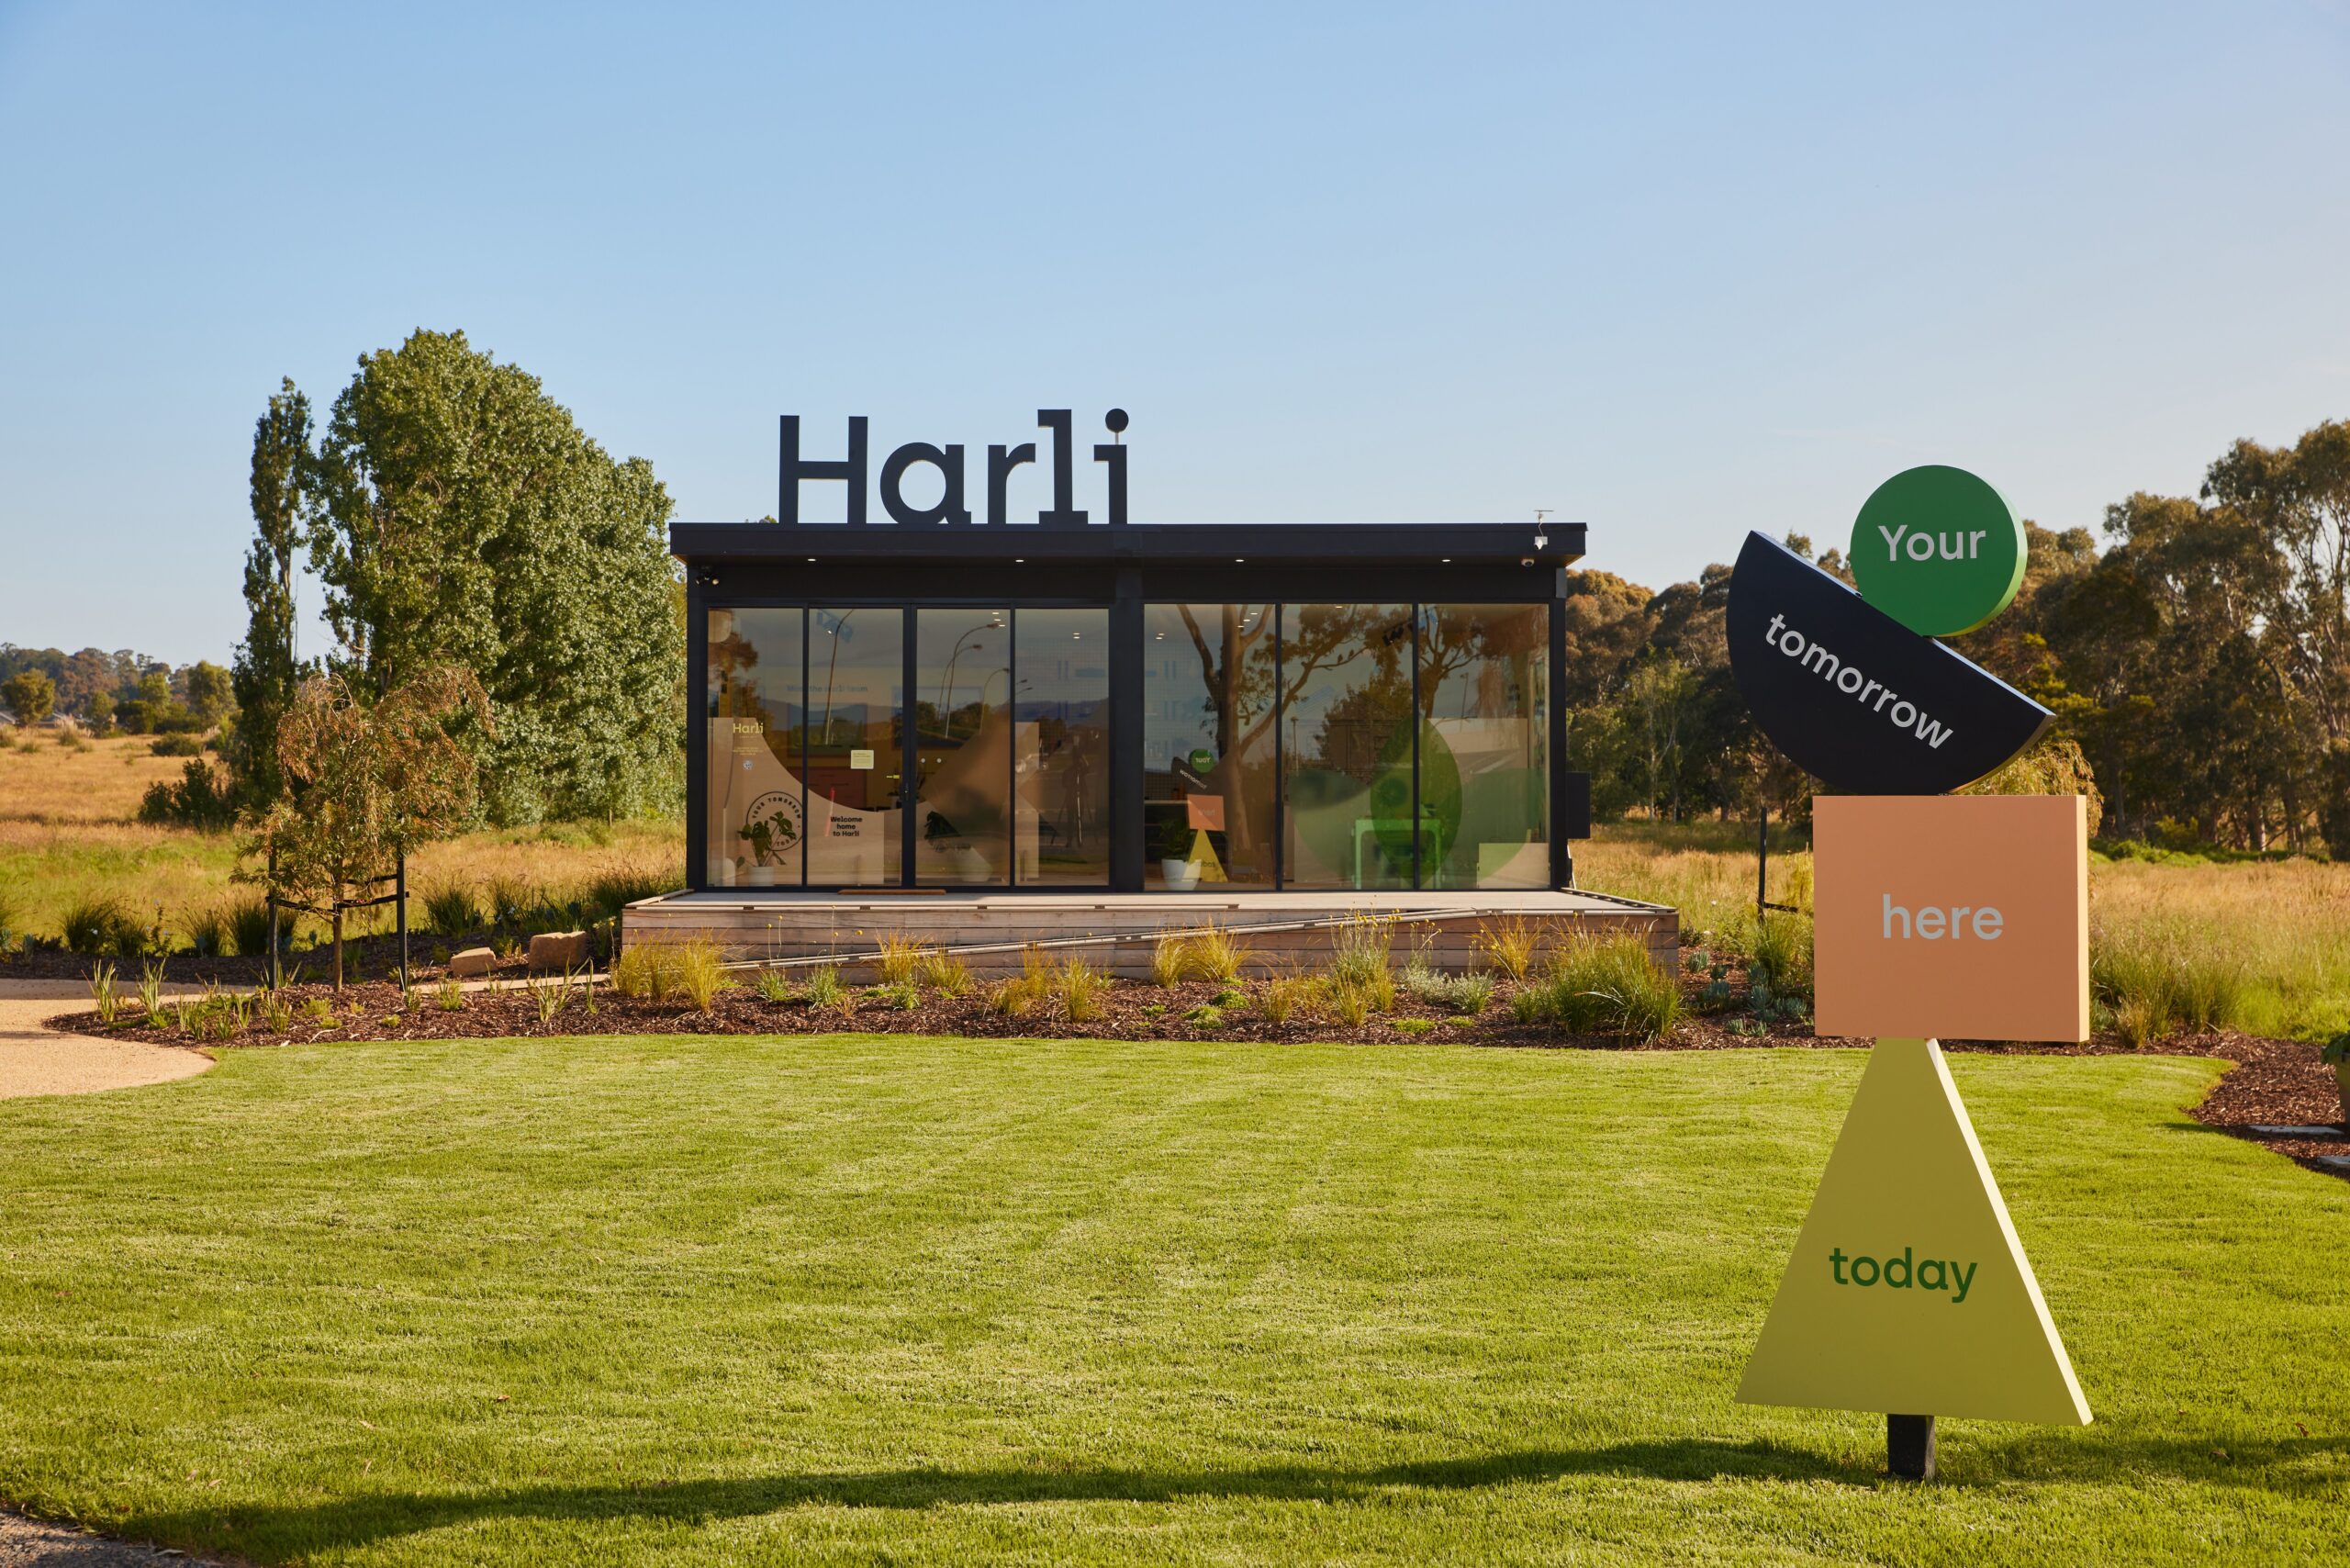 An image of the Harli office at the new development site